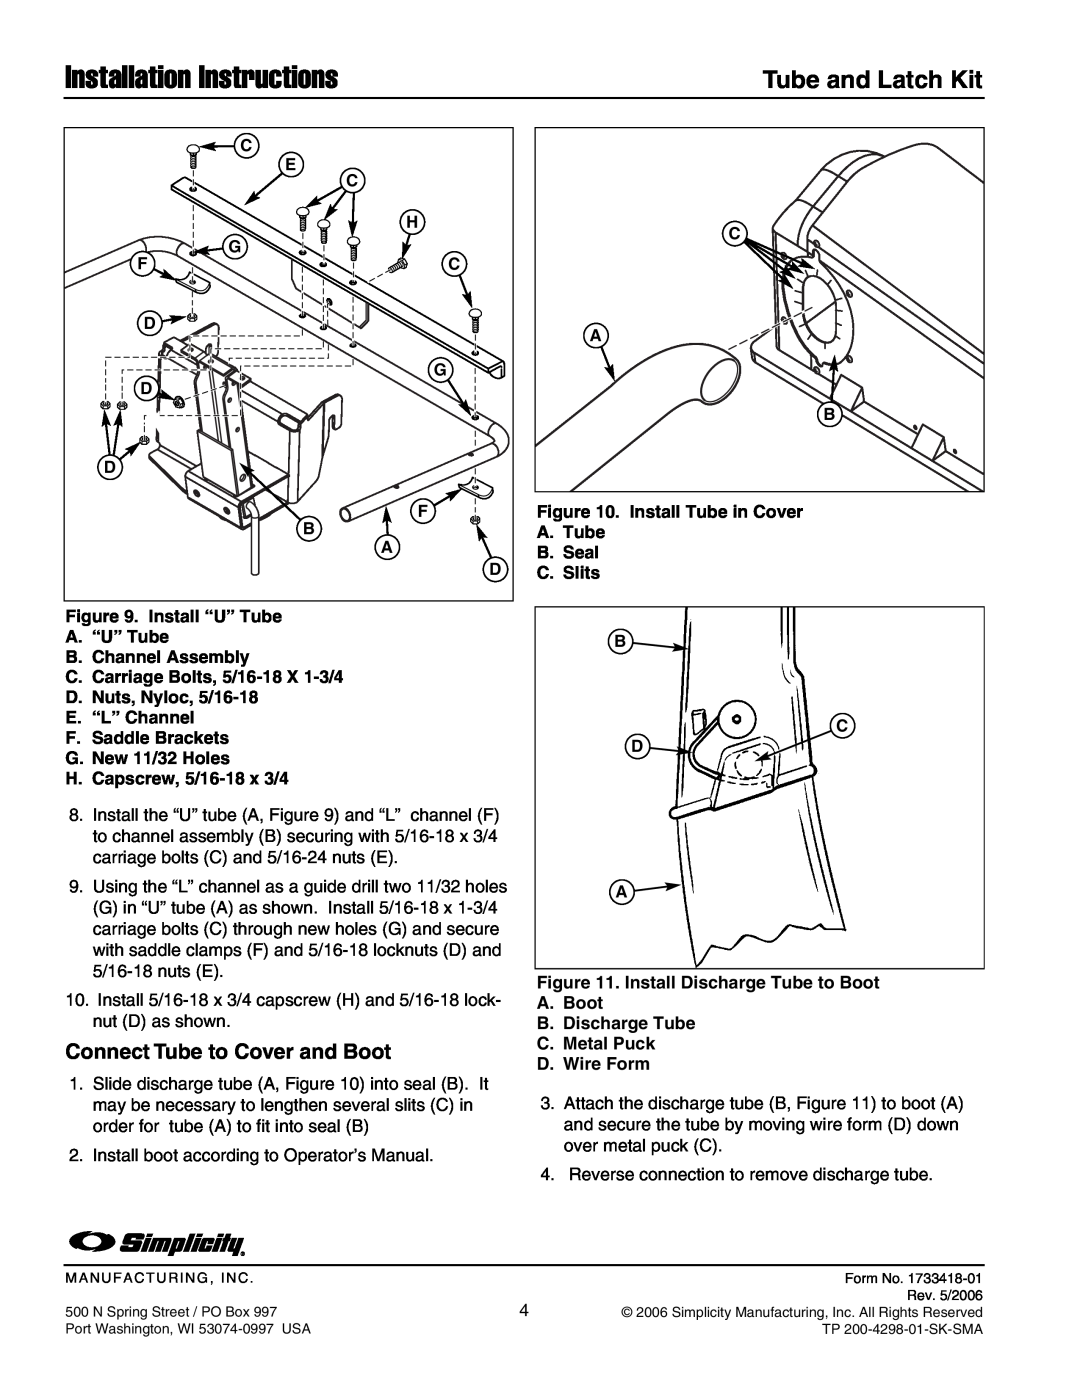 Snapper 1687262 installation instructions Installation Instructions, Tube and Latch Kit, Connect Tube to Cover and Boot 